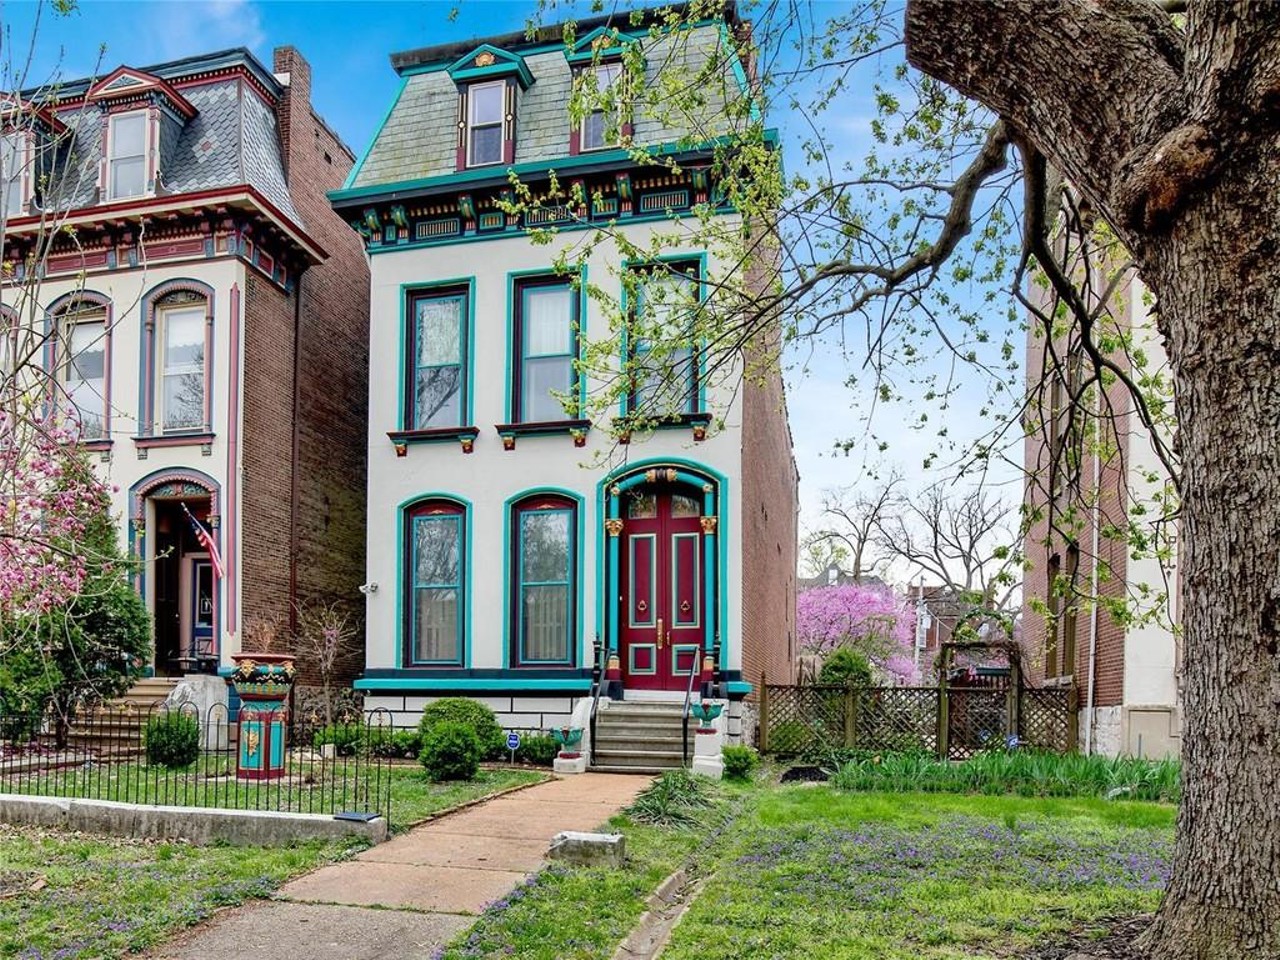 This Victorian Painted Lady in Lafayette Square Has a Magnificent Backyard [PHOTOS]